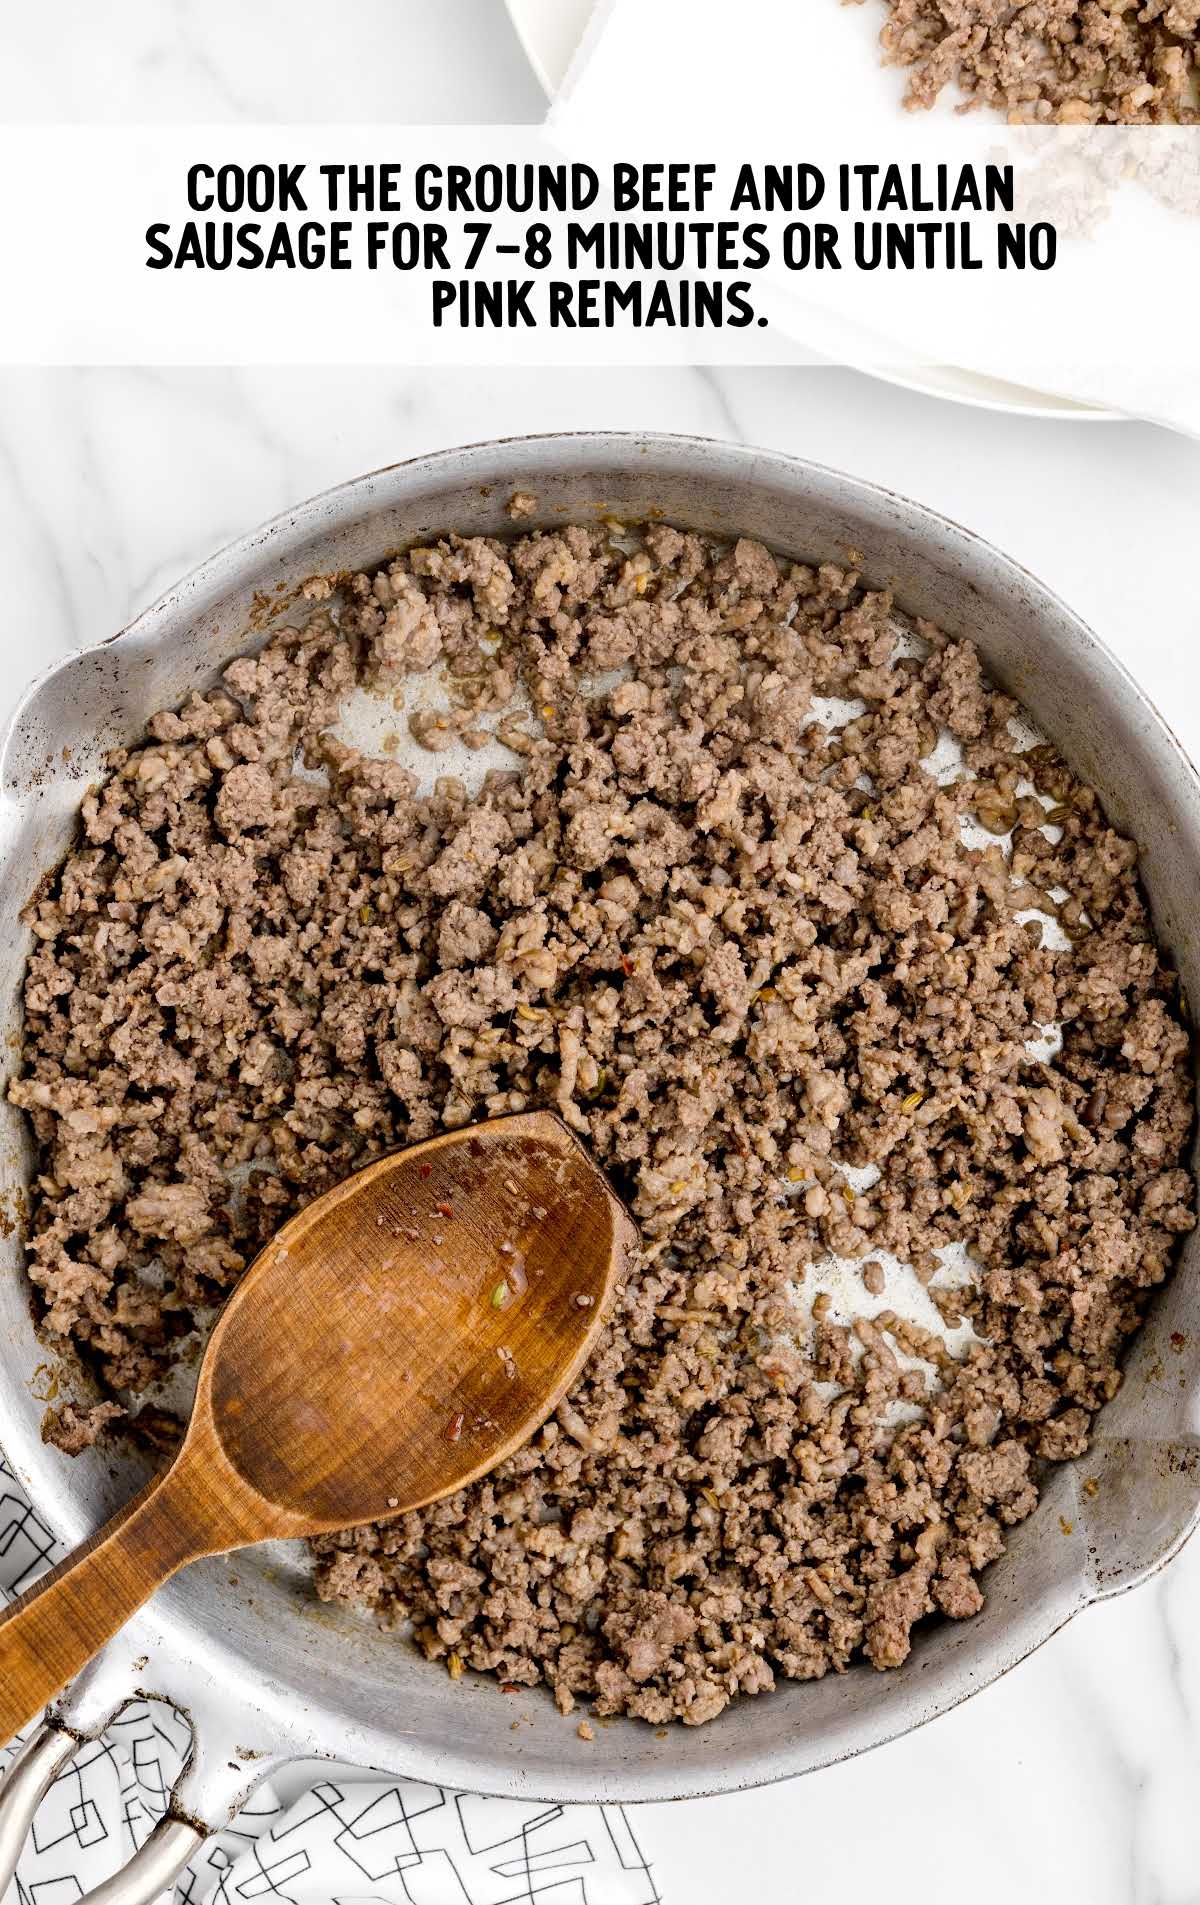 ground beef and Italian sausage being cooked and browned in a skillet